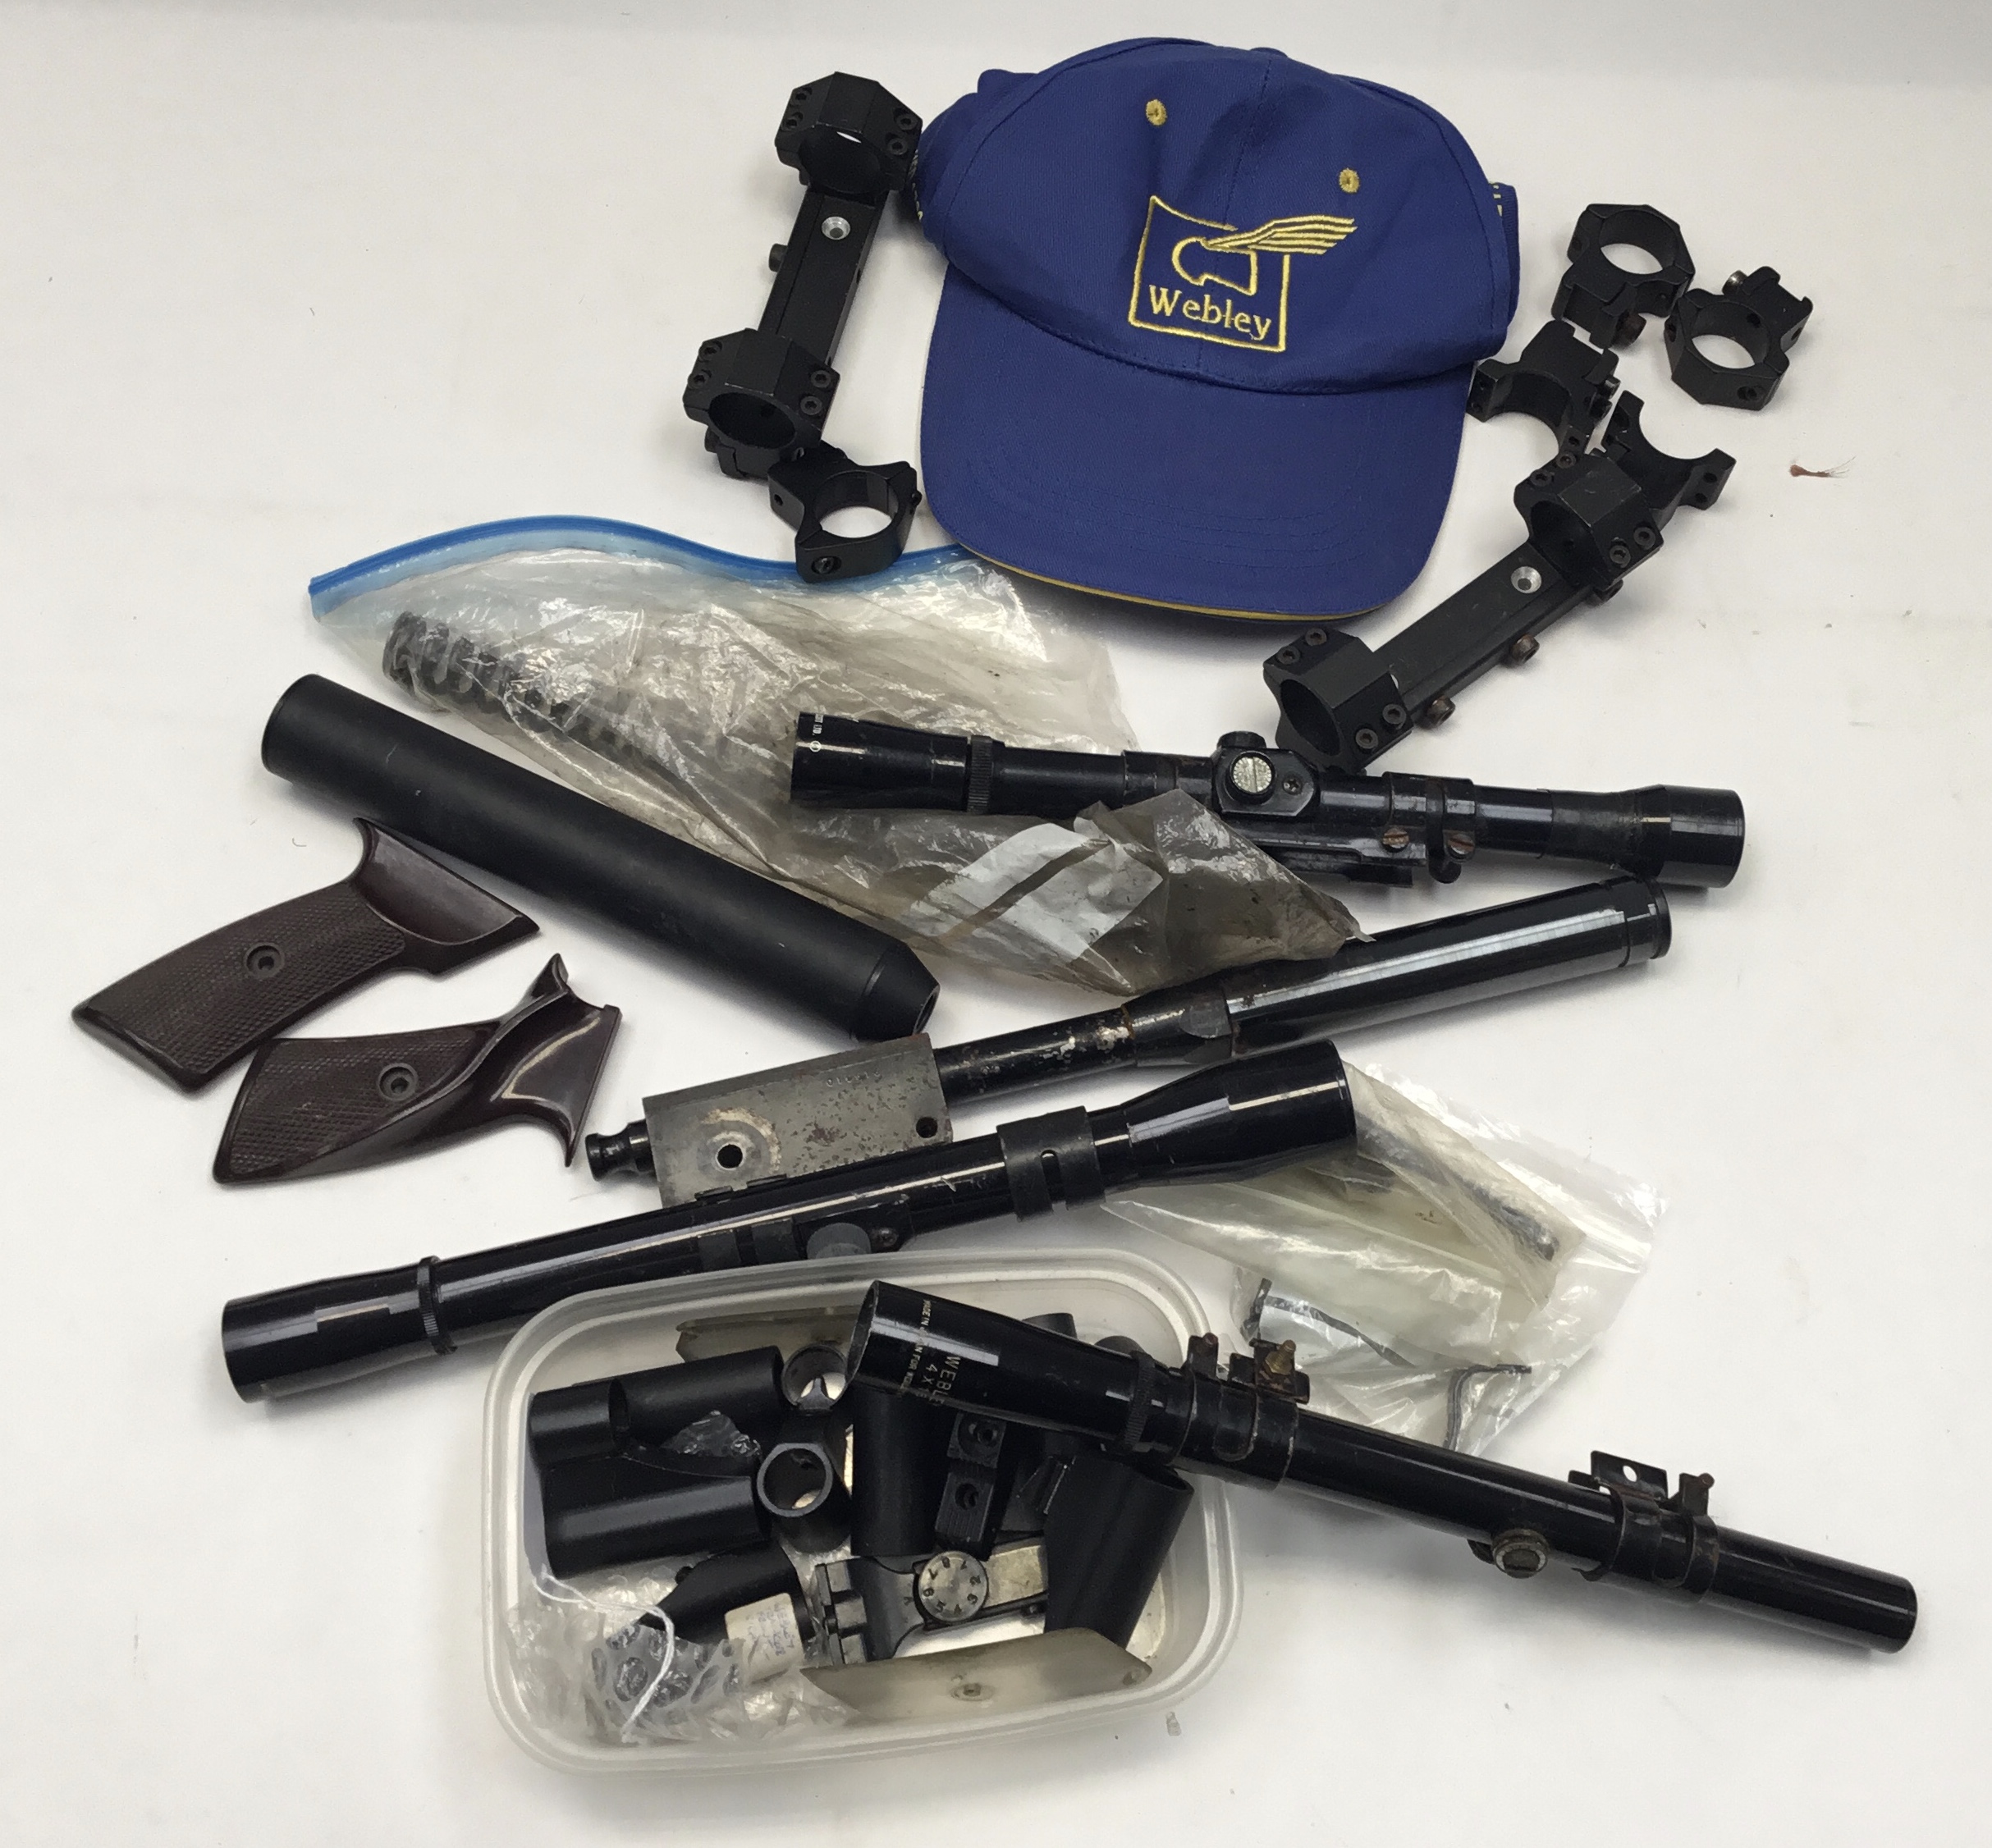 Collection of sights and other parts for Webley air pistols and rifles, plus a Webley baseball cap.